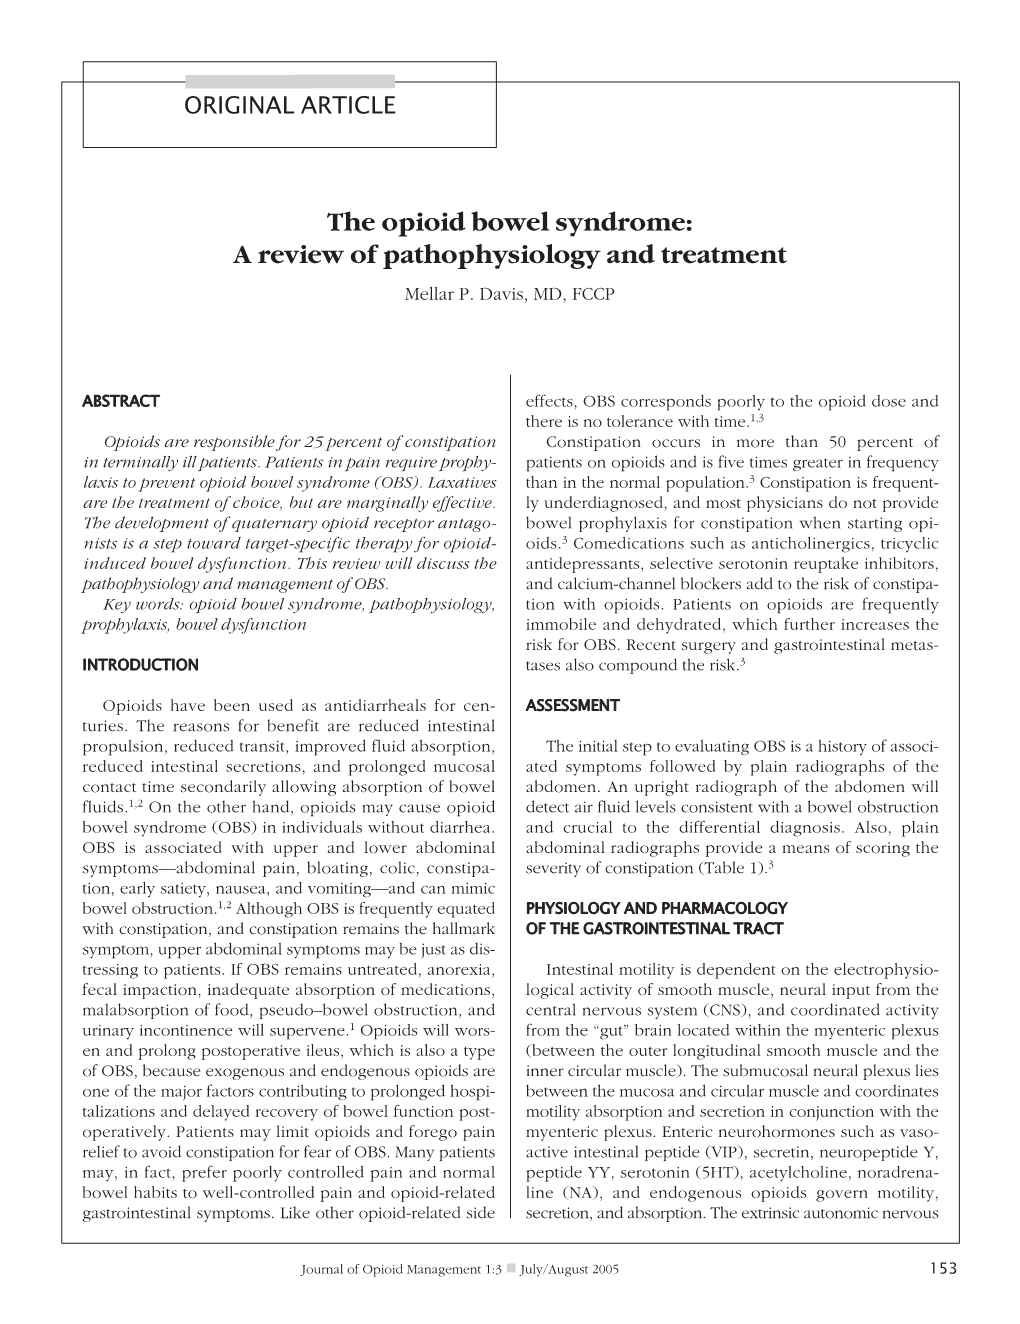 The Opioid Bowel Syndrome: a Review of Pathophysiology and Treatment Mellar P